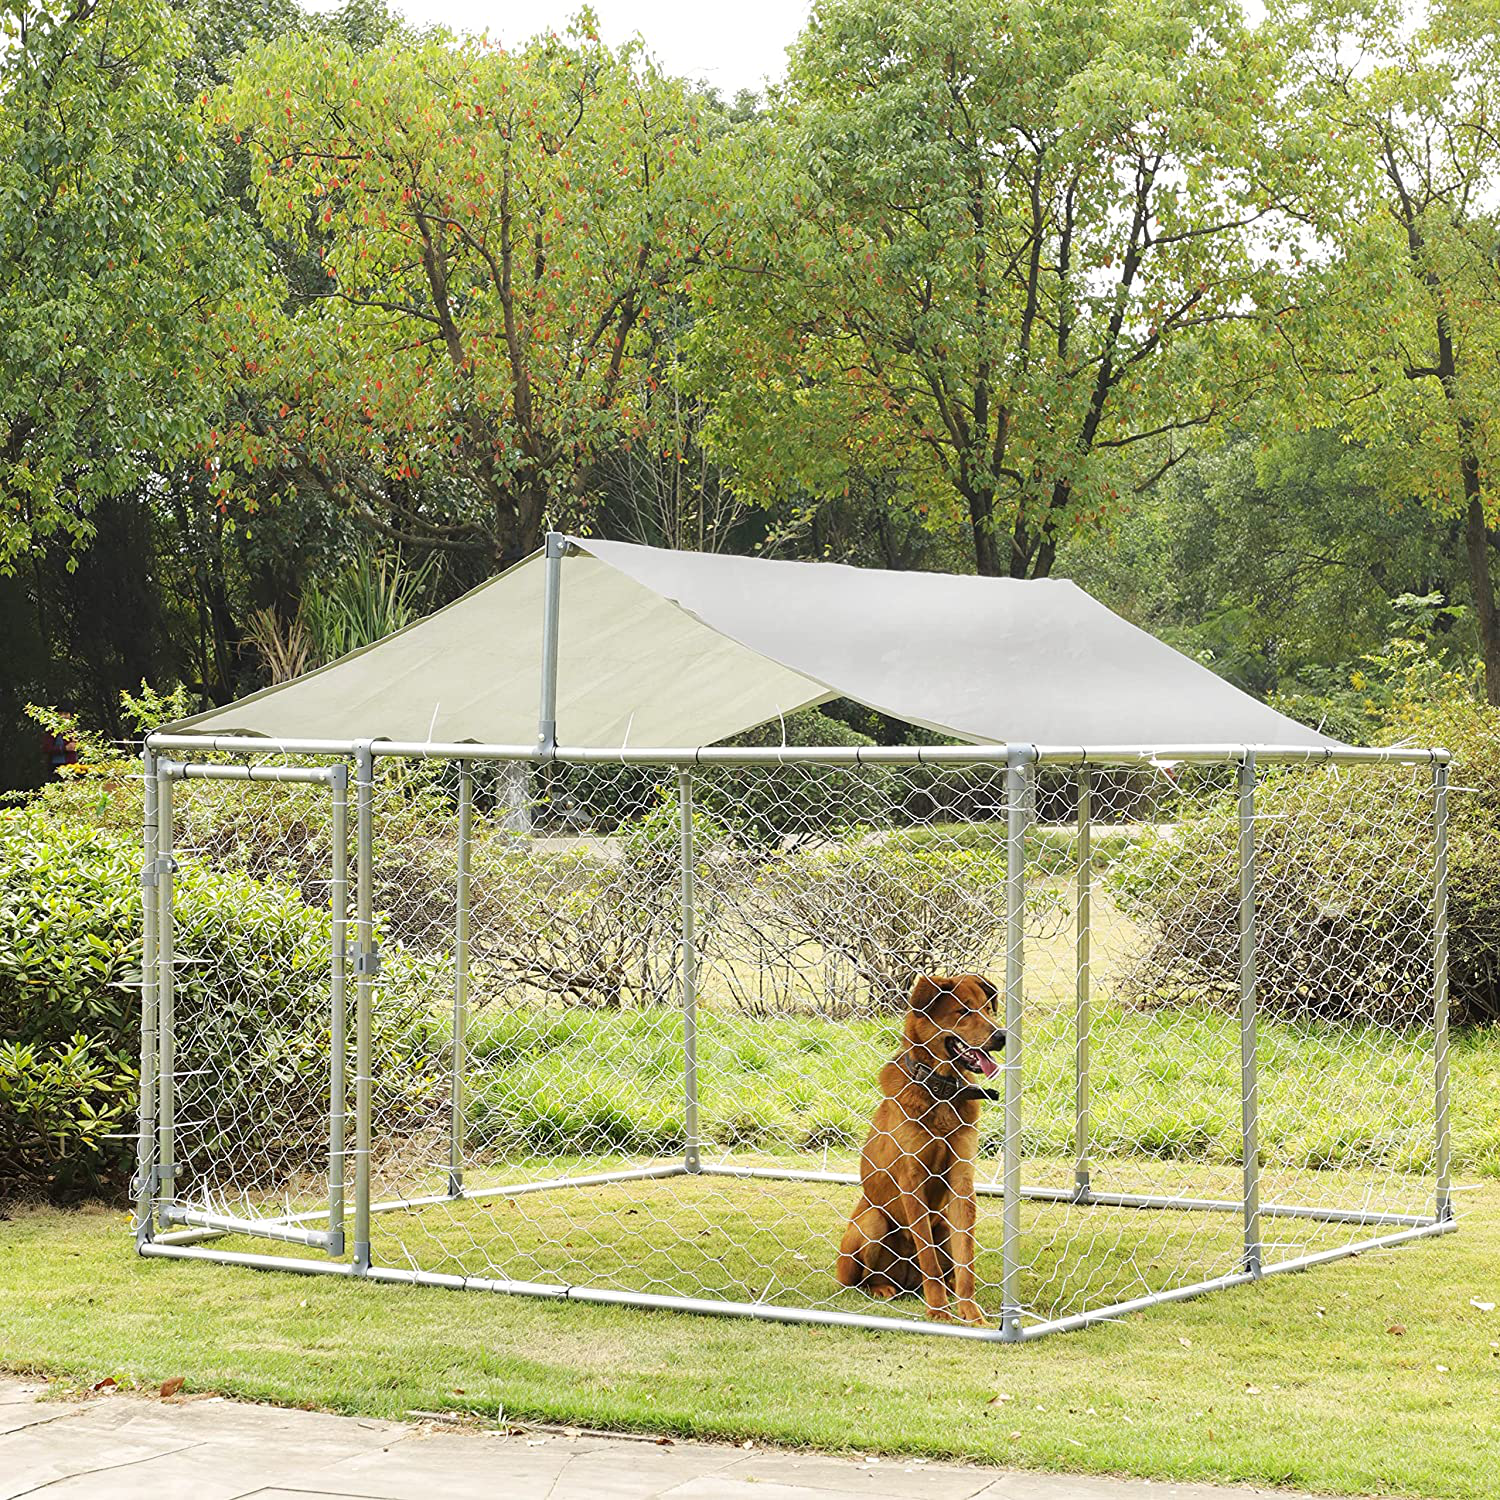 MAGIC UNION outside Dog Kennels Playpen for Dogs Crate with Uv-Resistant Waterproof Cover Outdoor Dog Fence for Backyard Dog Run House